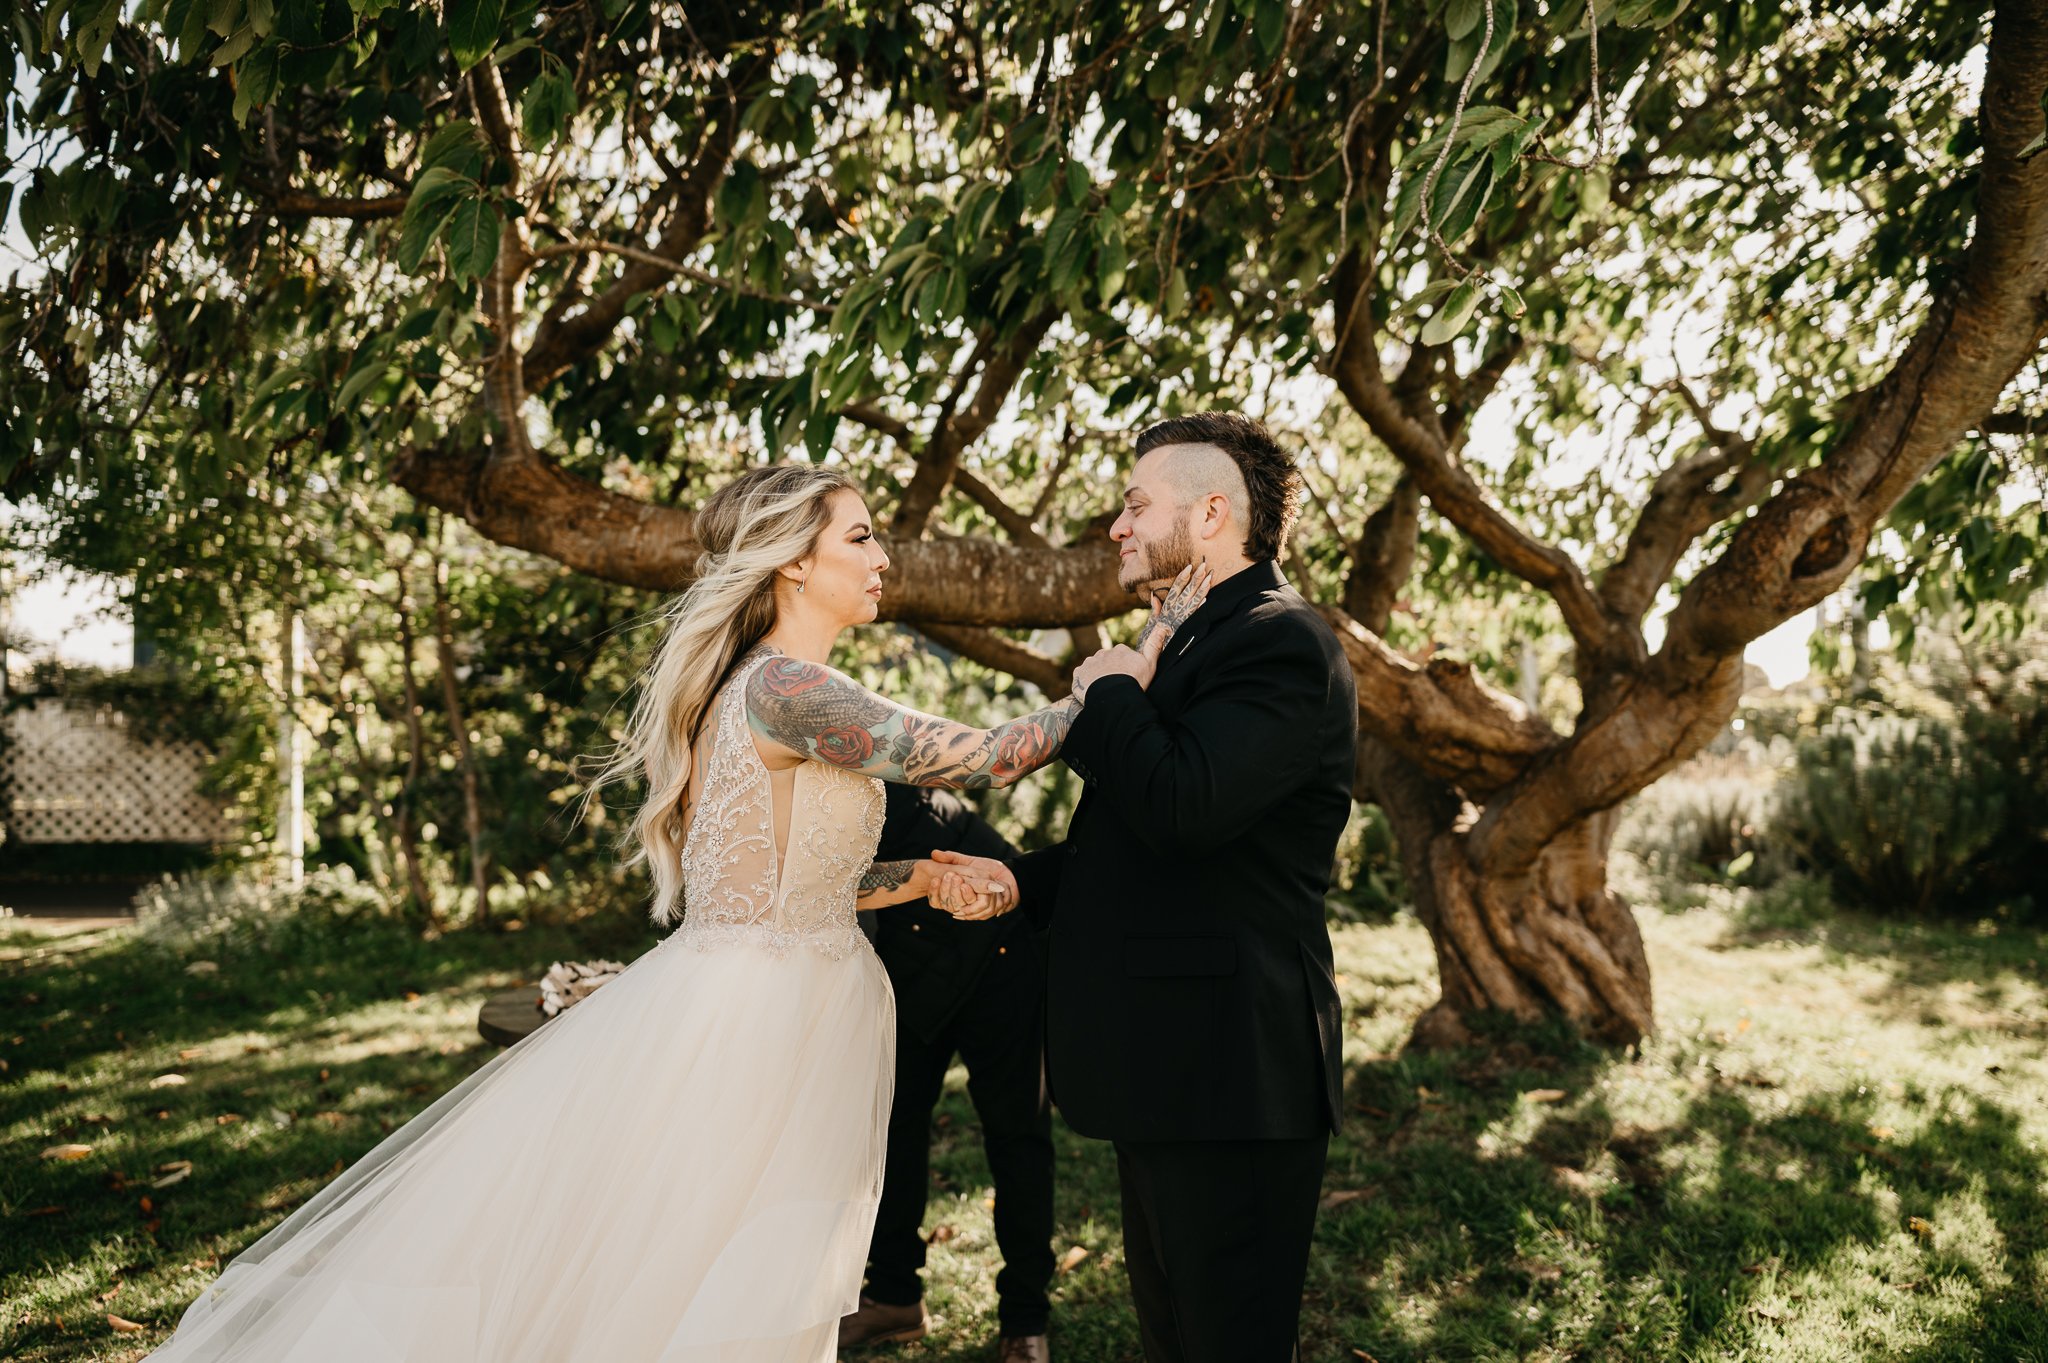 bride and groom at  outdoor altar in a garden under a shade tree, bride is touching the side of grooms face in a tender moment.